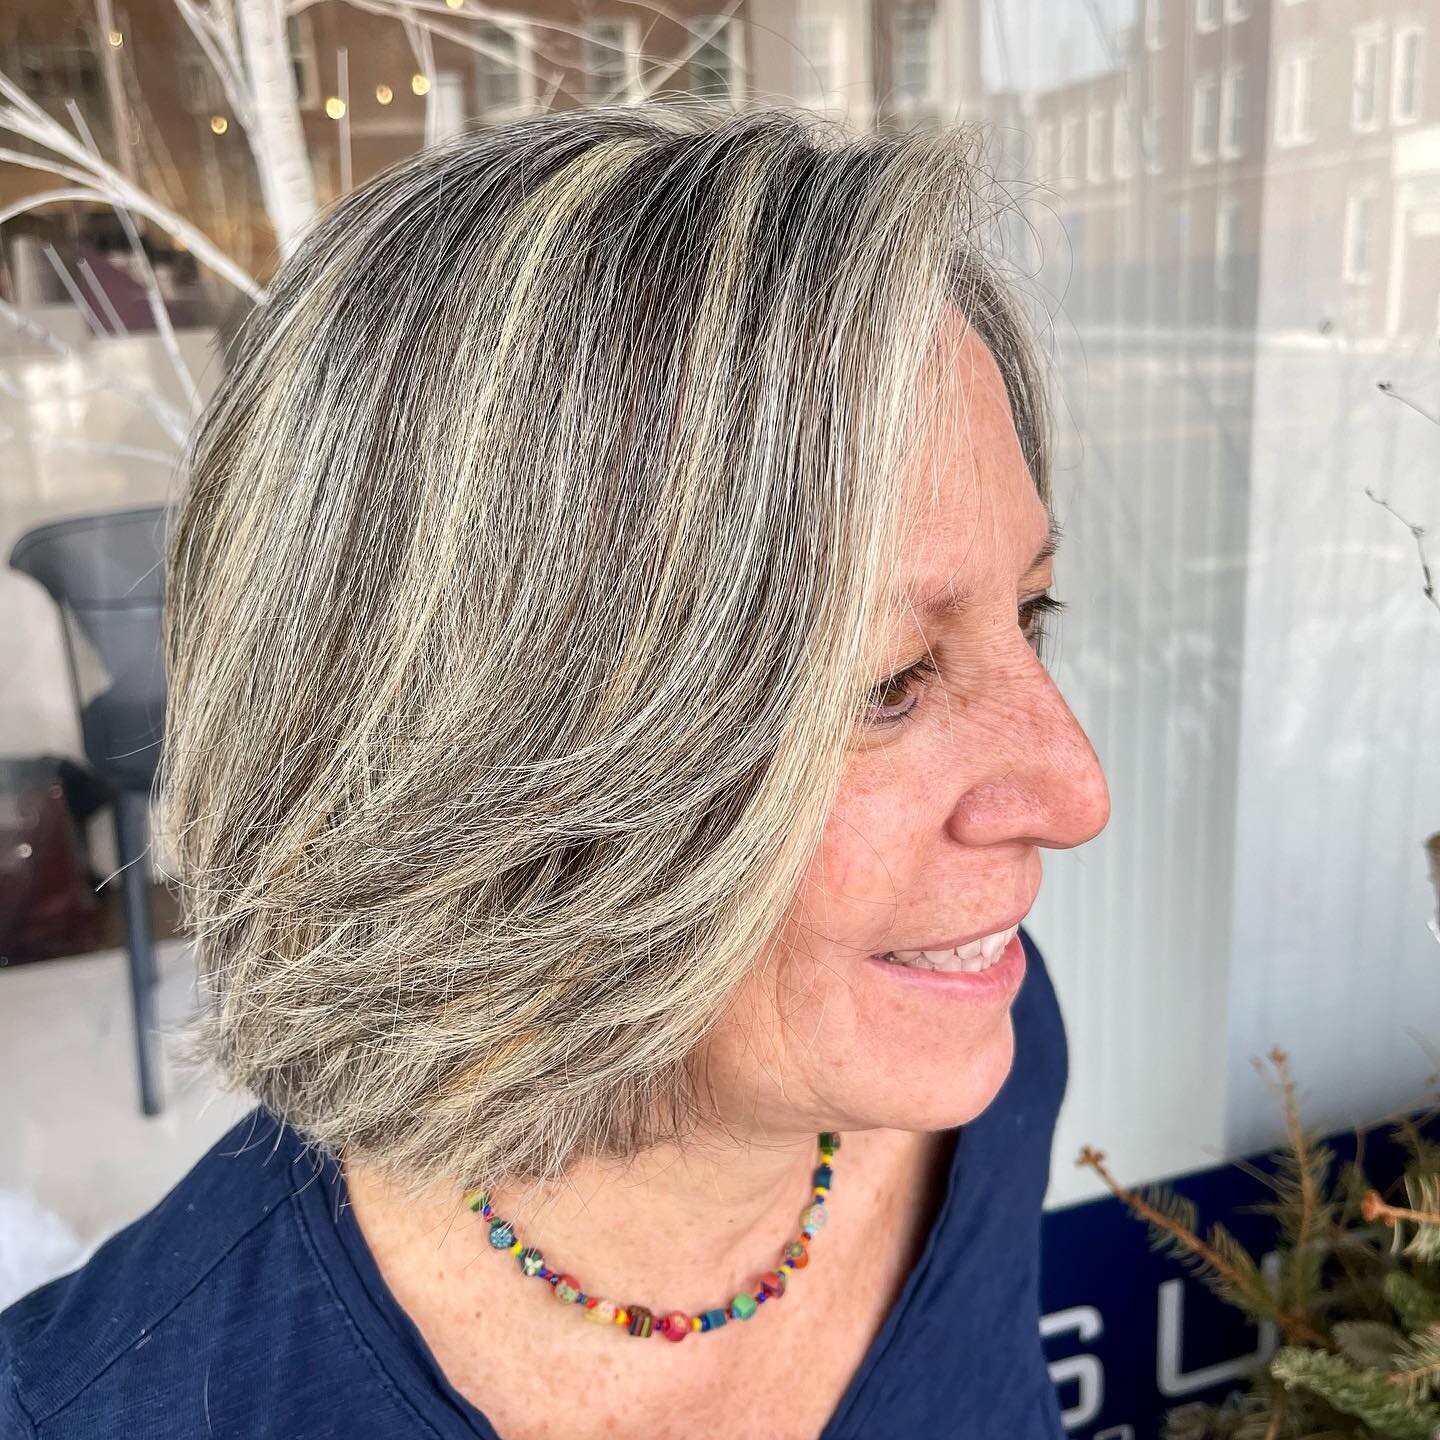 Enhancing a natural look with salt &amp; pepper blending 🧂🖤

STYLIST: color by Lois, haircut by Angela

.
.

#greyblending #greyblendinghighlights #highlights #natickhairstylist #lowlights #shorthaircut #greyhairdontcare